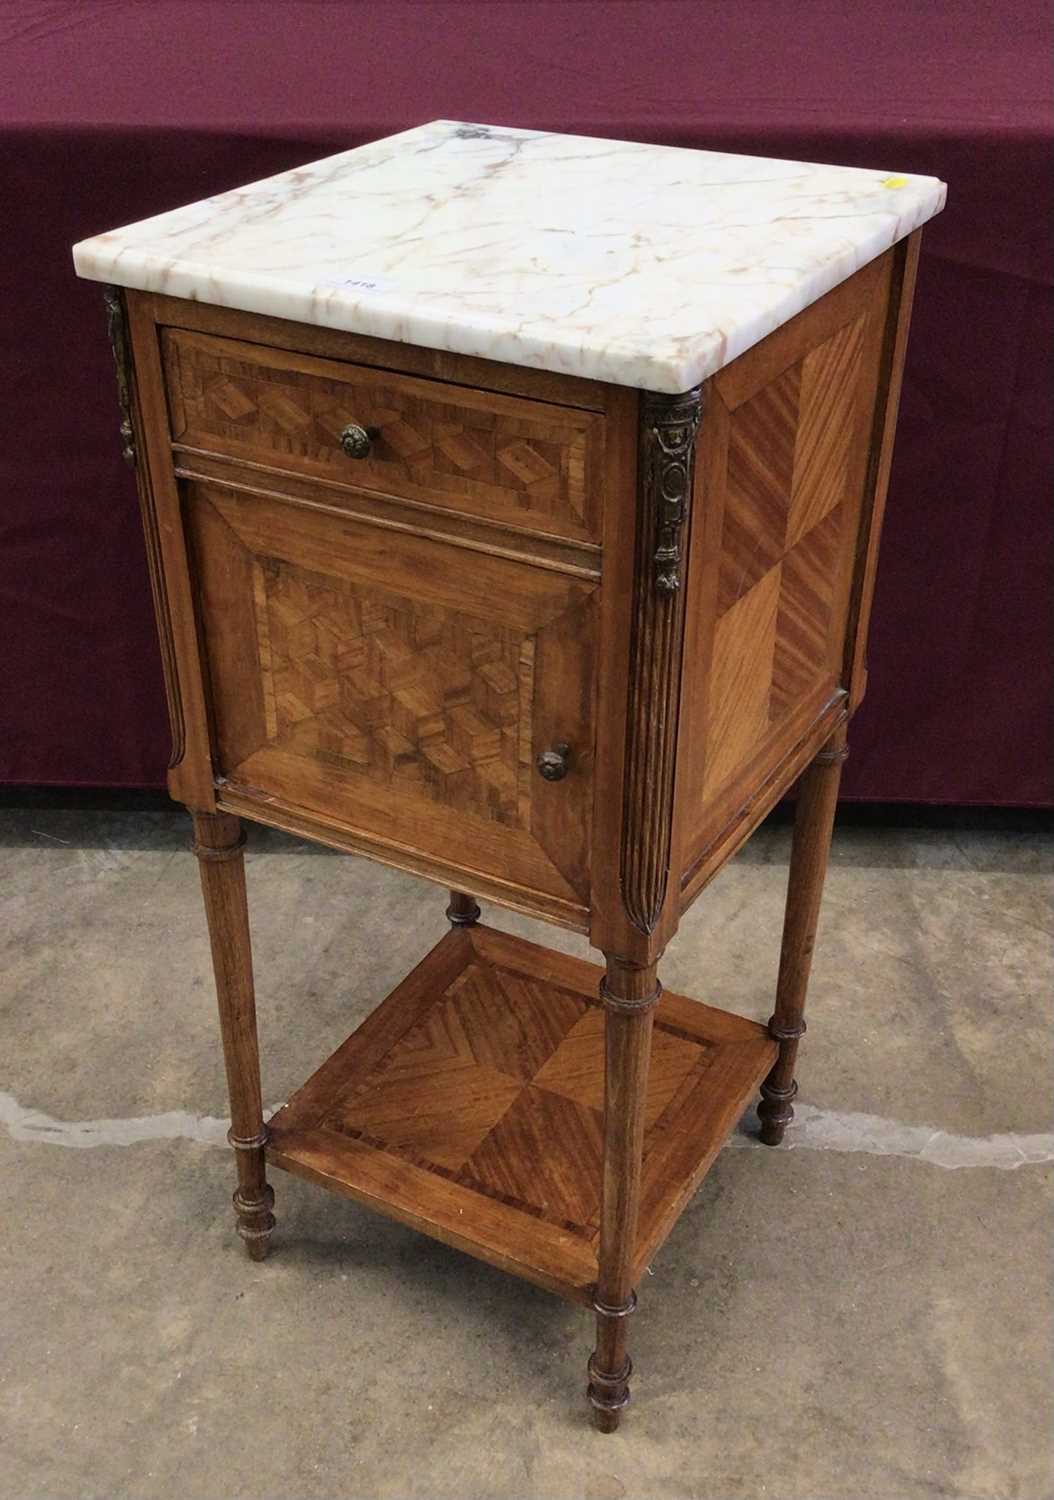 Early 20th century French parquetry bedside cupboard with marble top and unusual ceramic liner fitte